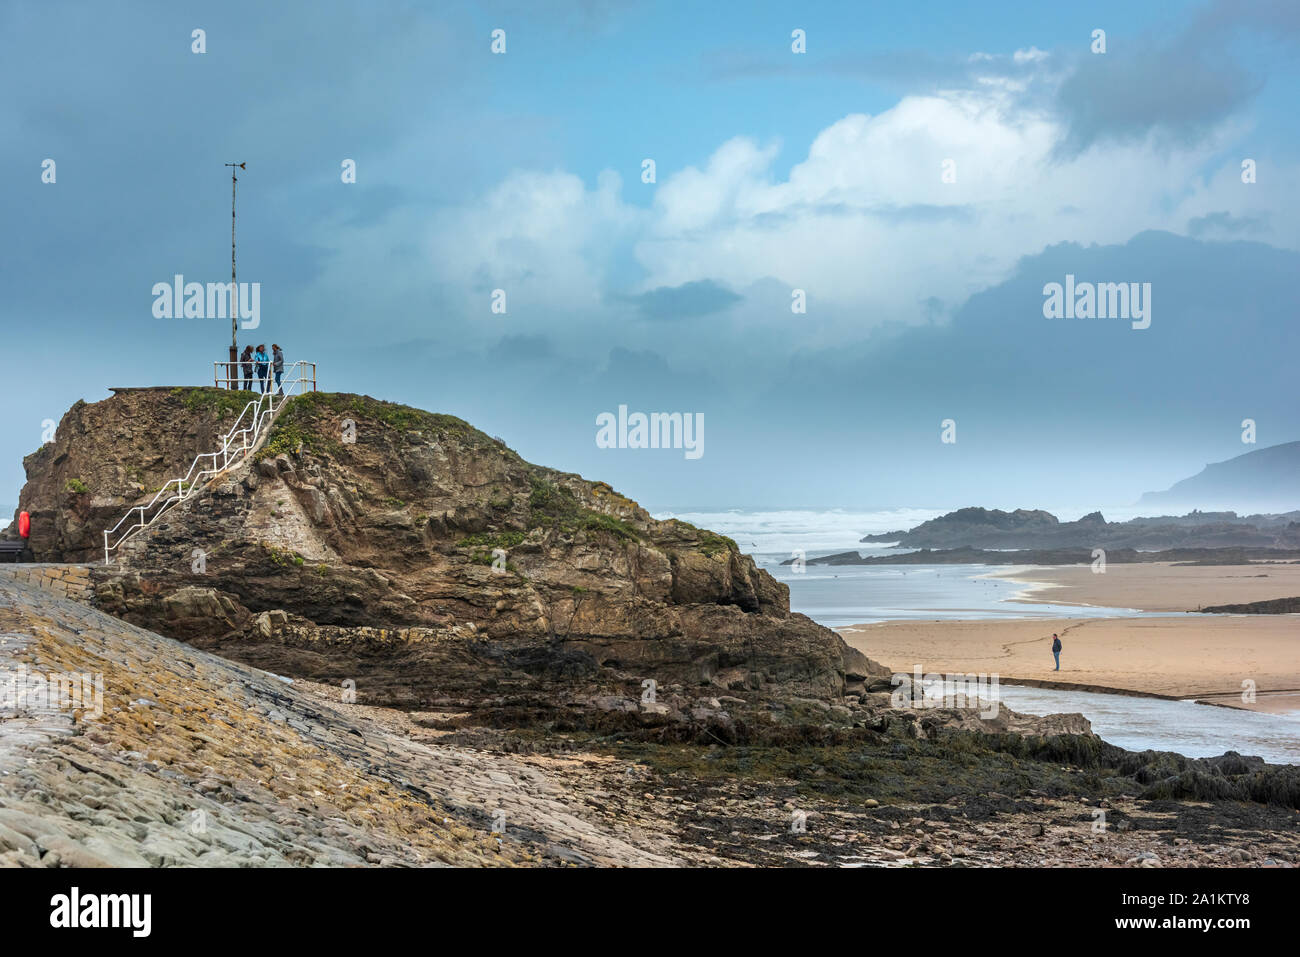 Bude, North Cornwall, England. Friday 27th September 2019. UK Weather. After a night of torrential rain and gale force winds, the stormy weather continues as a man enjoys a walk on windswept Summerleaze Beach and three friends climb the steps on the breakwater in  Bude North Cornwall. Terry Mathews/Alamy Live News. Stock Photo